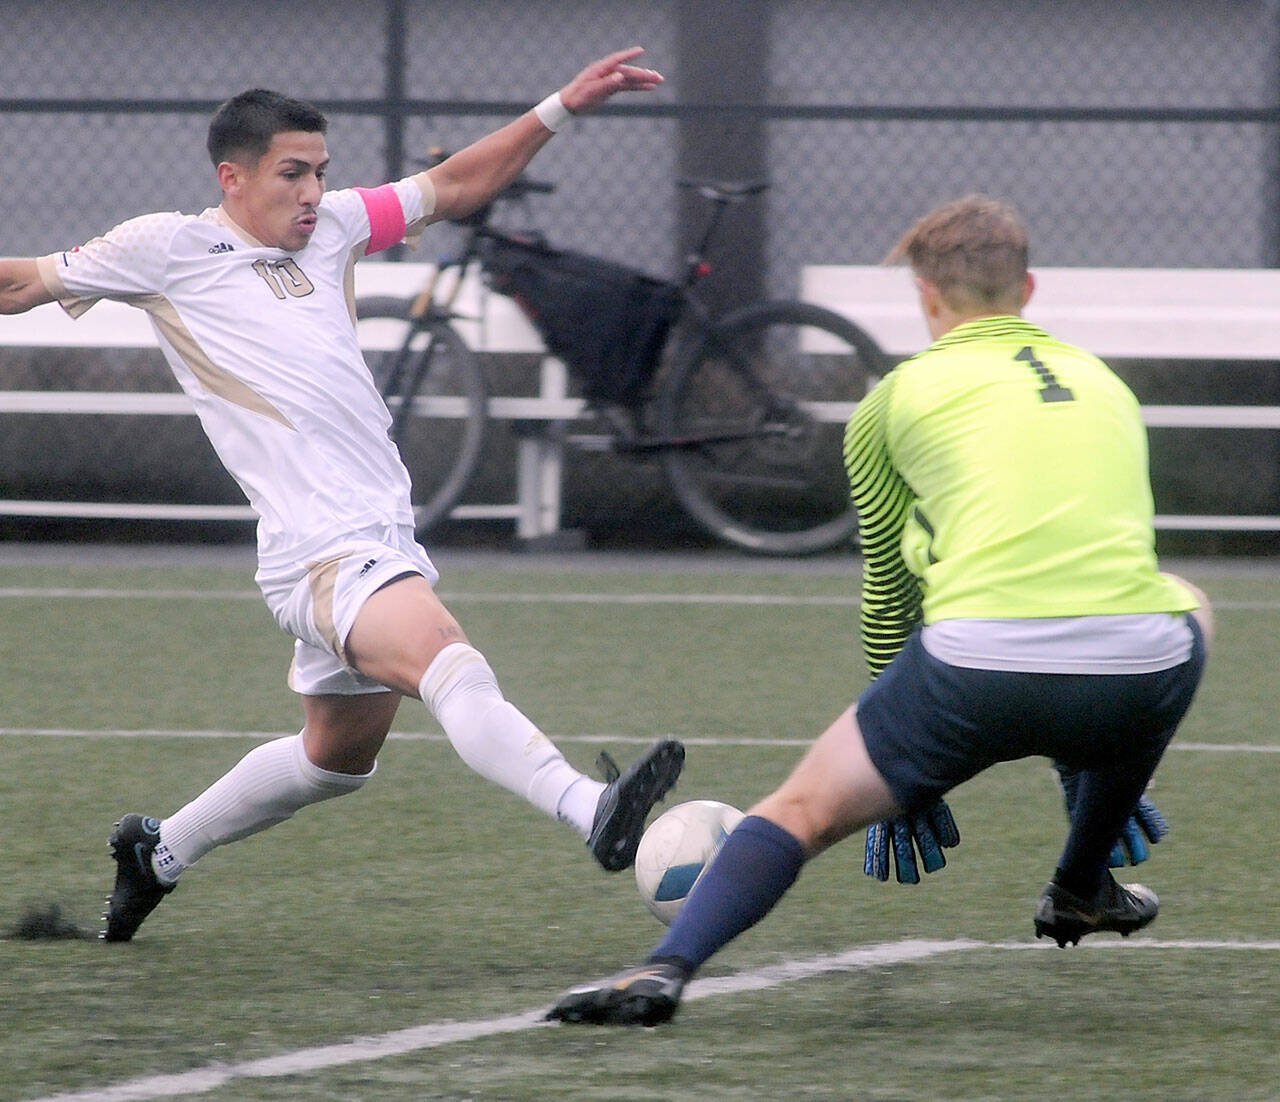 KEITH THORPE/PENINSULA DAILY NEWS
Peninsula's Fernando Tavares, left, charges into Bellevue goalkeeper Nicola Luongo, barely missing a first-quarter goal on Wednesday on Wally Sigmar Field.